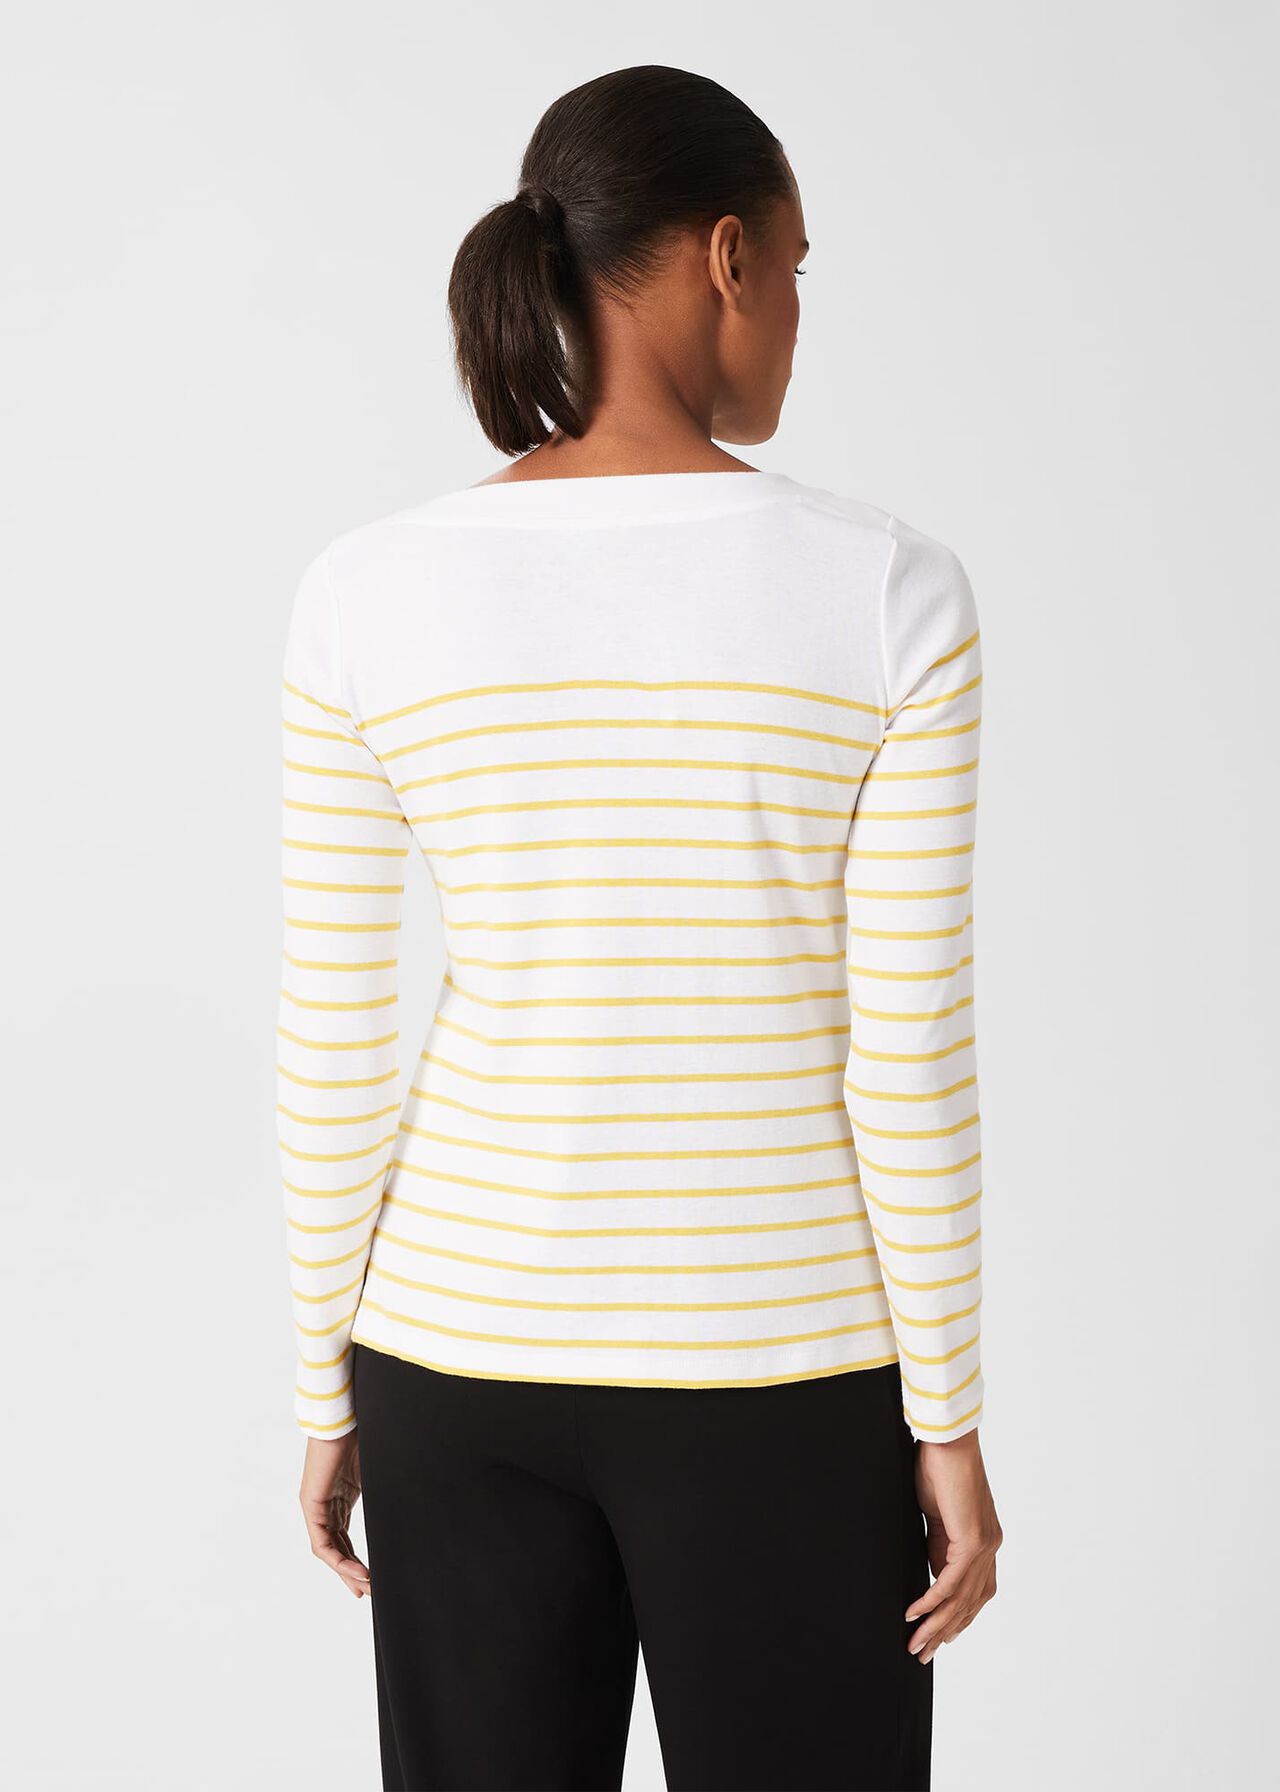 Constance Cotton Striped Top , White Yellow, hi-res